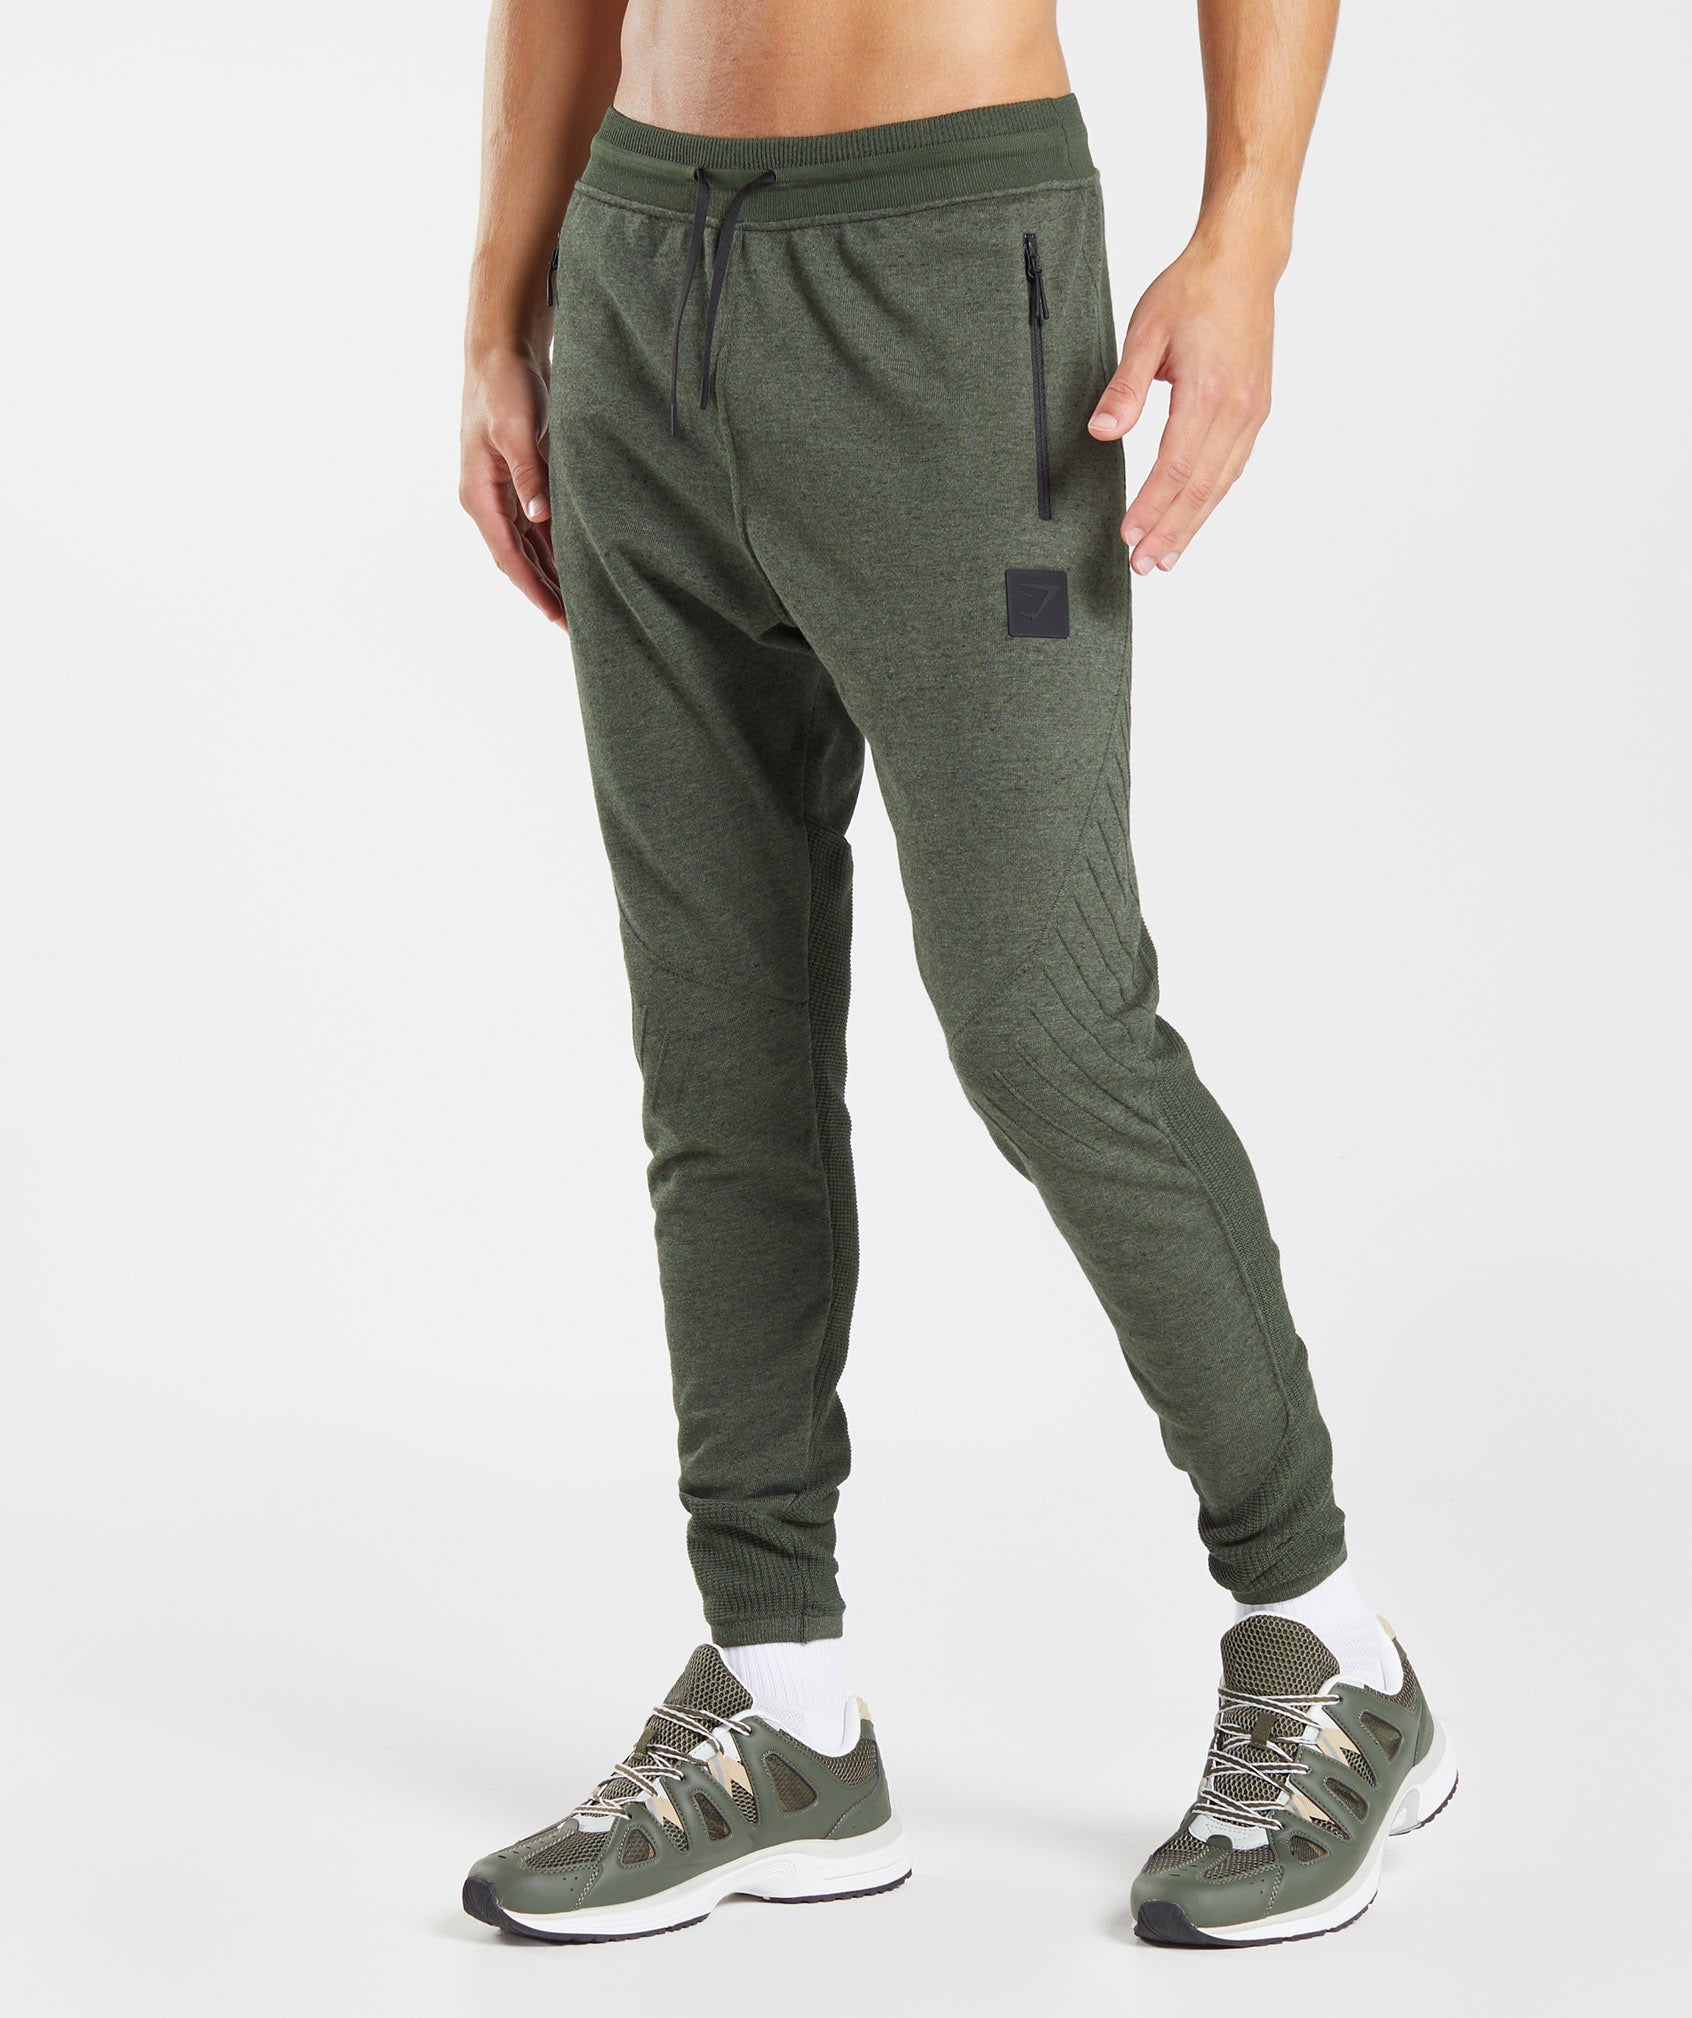 Retake Knit Joggers in Moss Olive Marl is out of stock